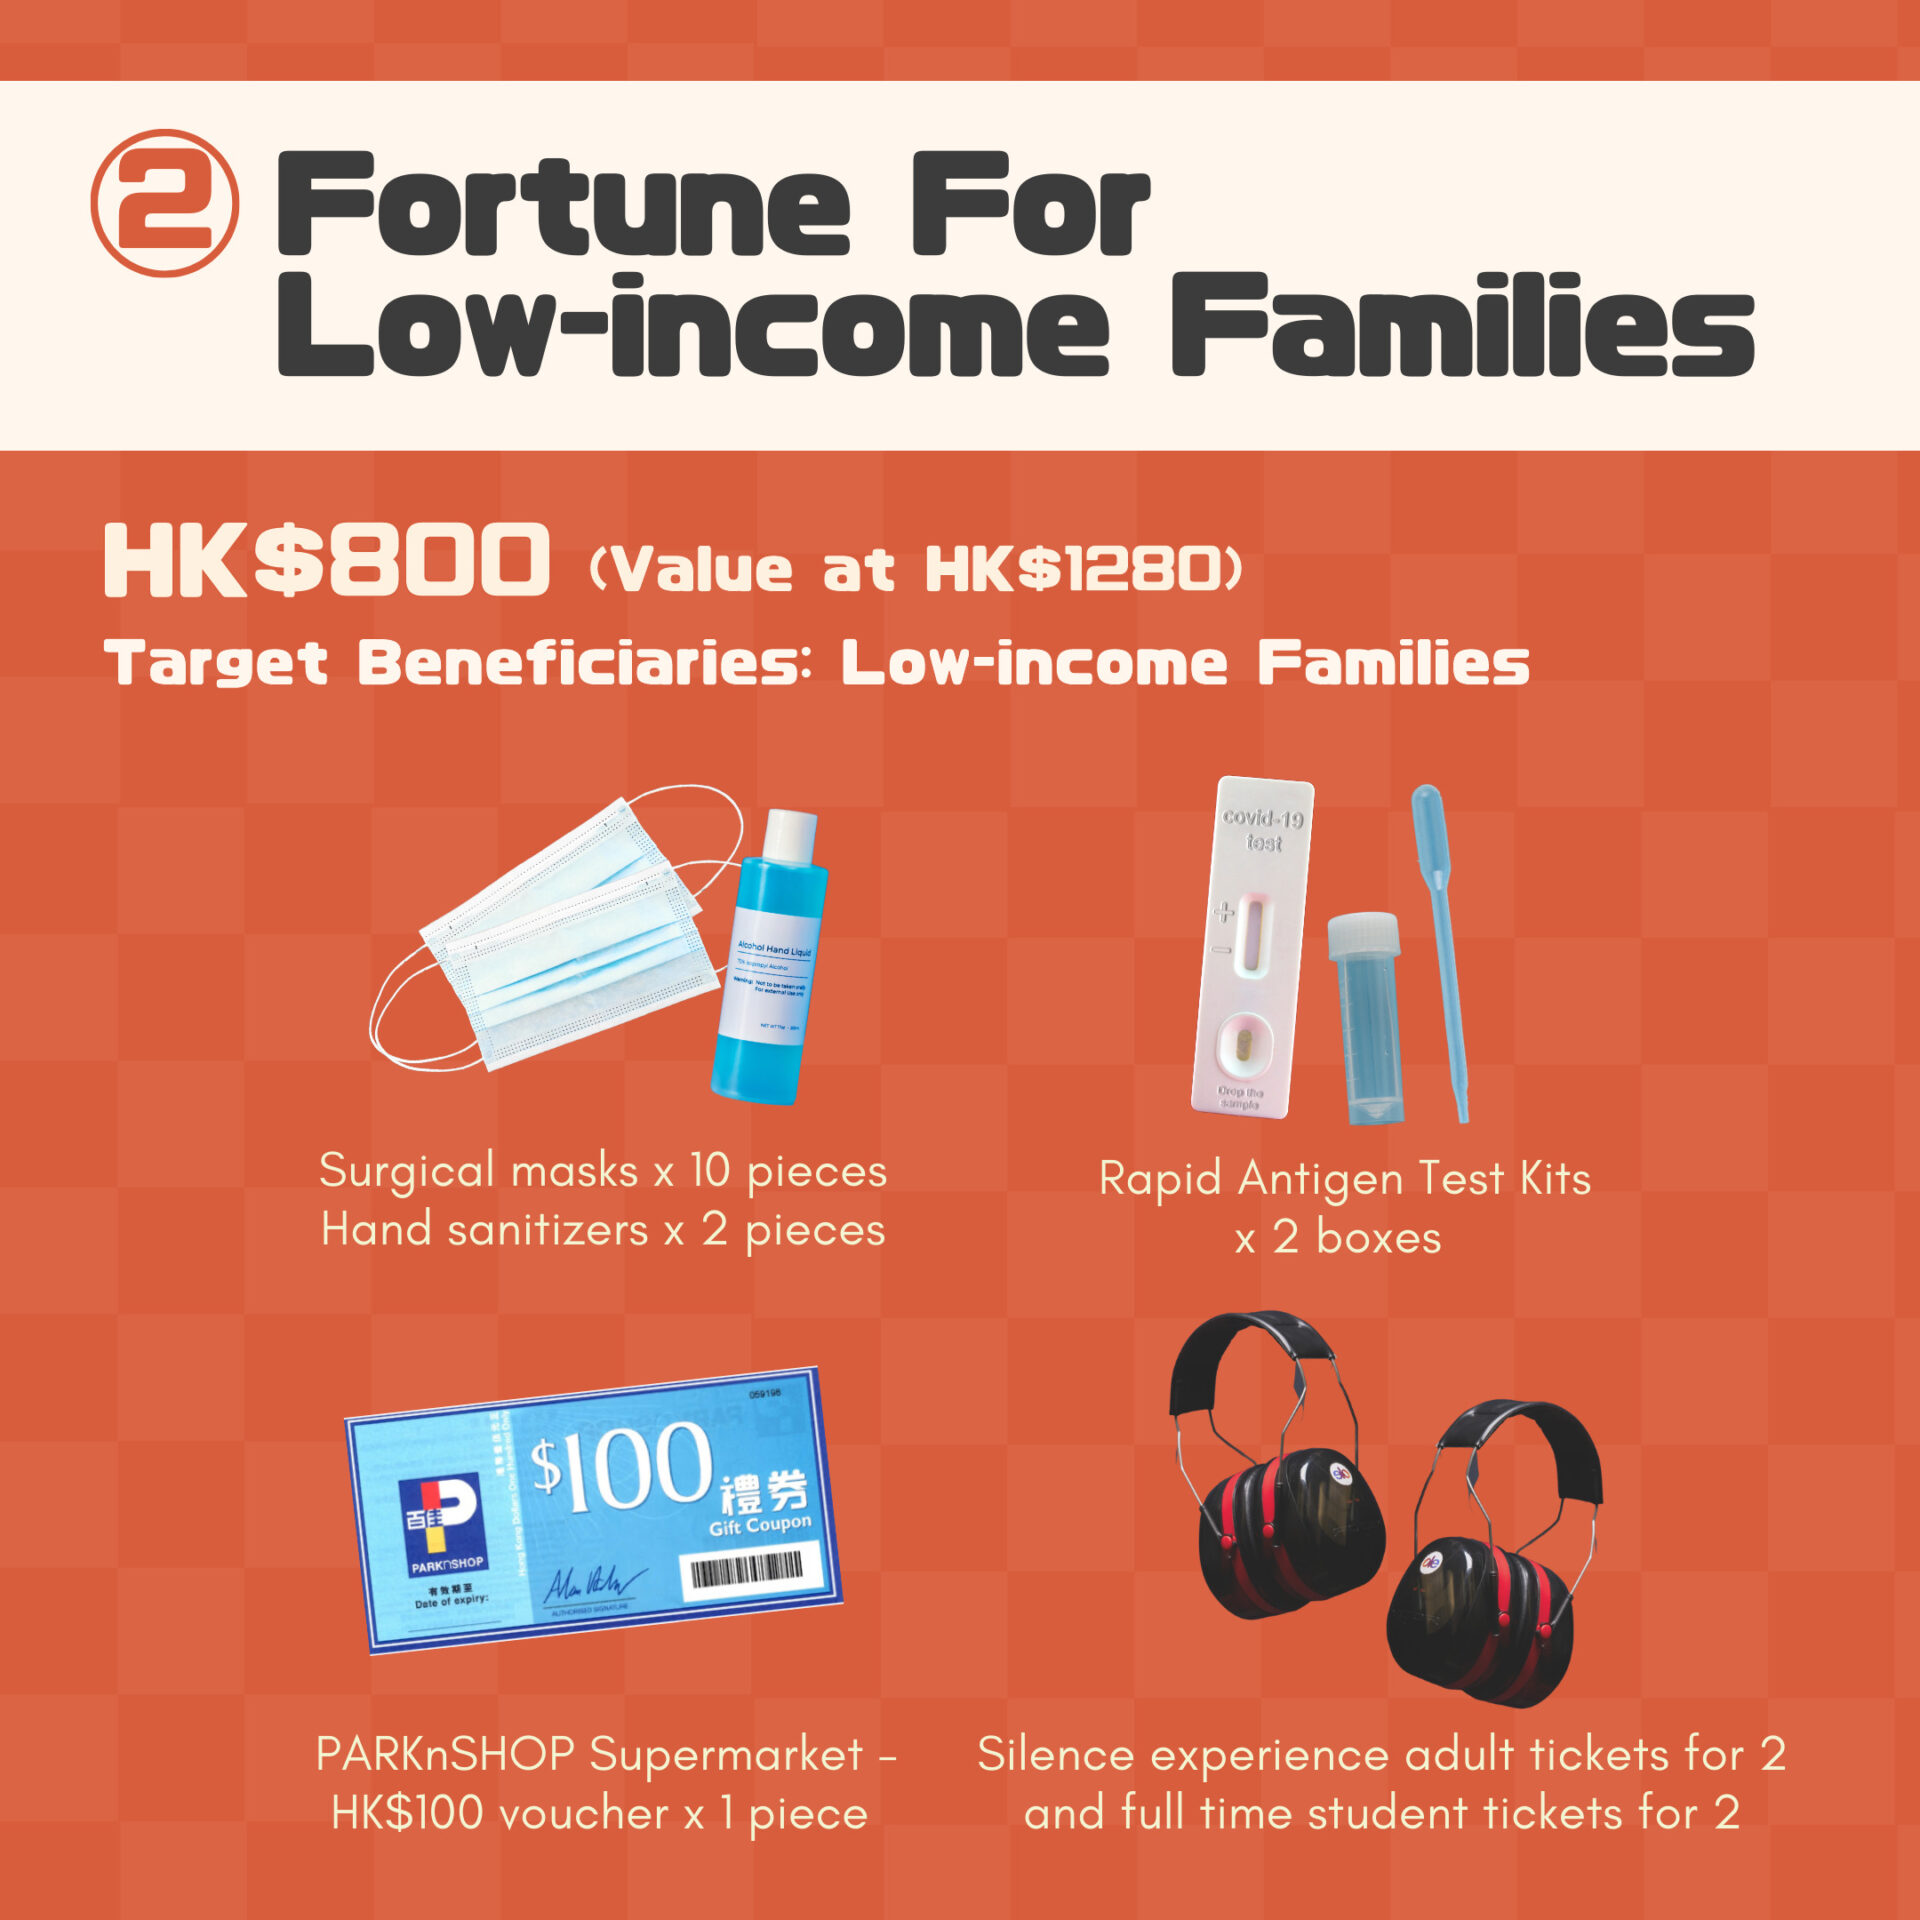 Fortune For Low-income Families